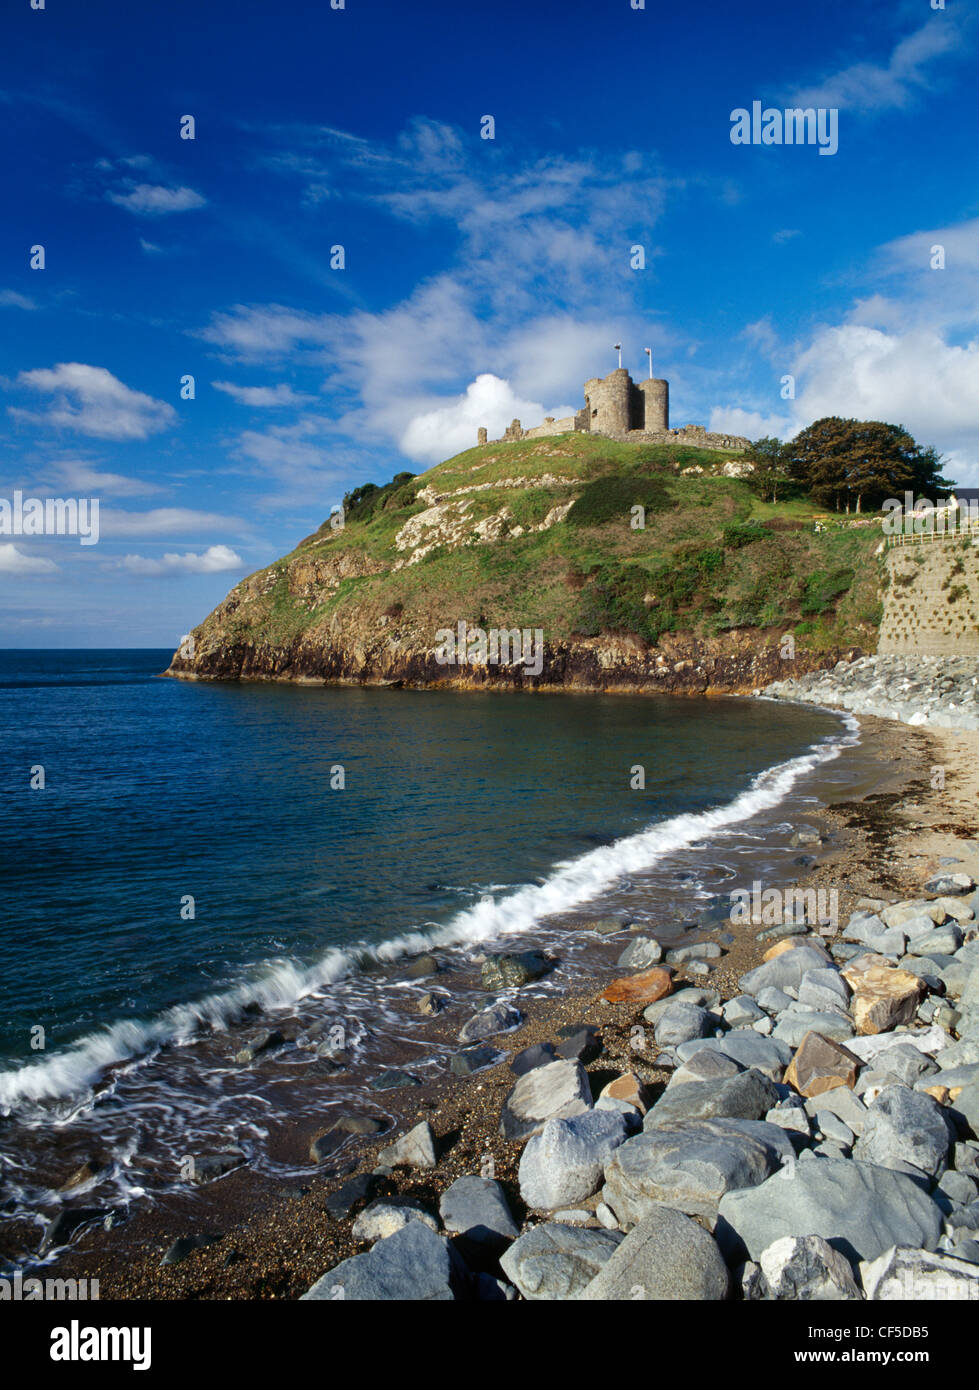 A side view from the jetty of beach, Criccieth Castle and headland. Built by Llywelyn ab Iorwerth (the Great) around 1230, the c Stock Photo